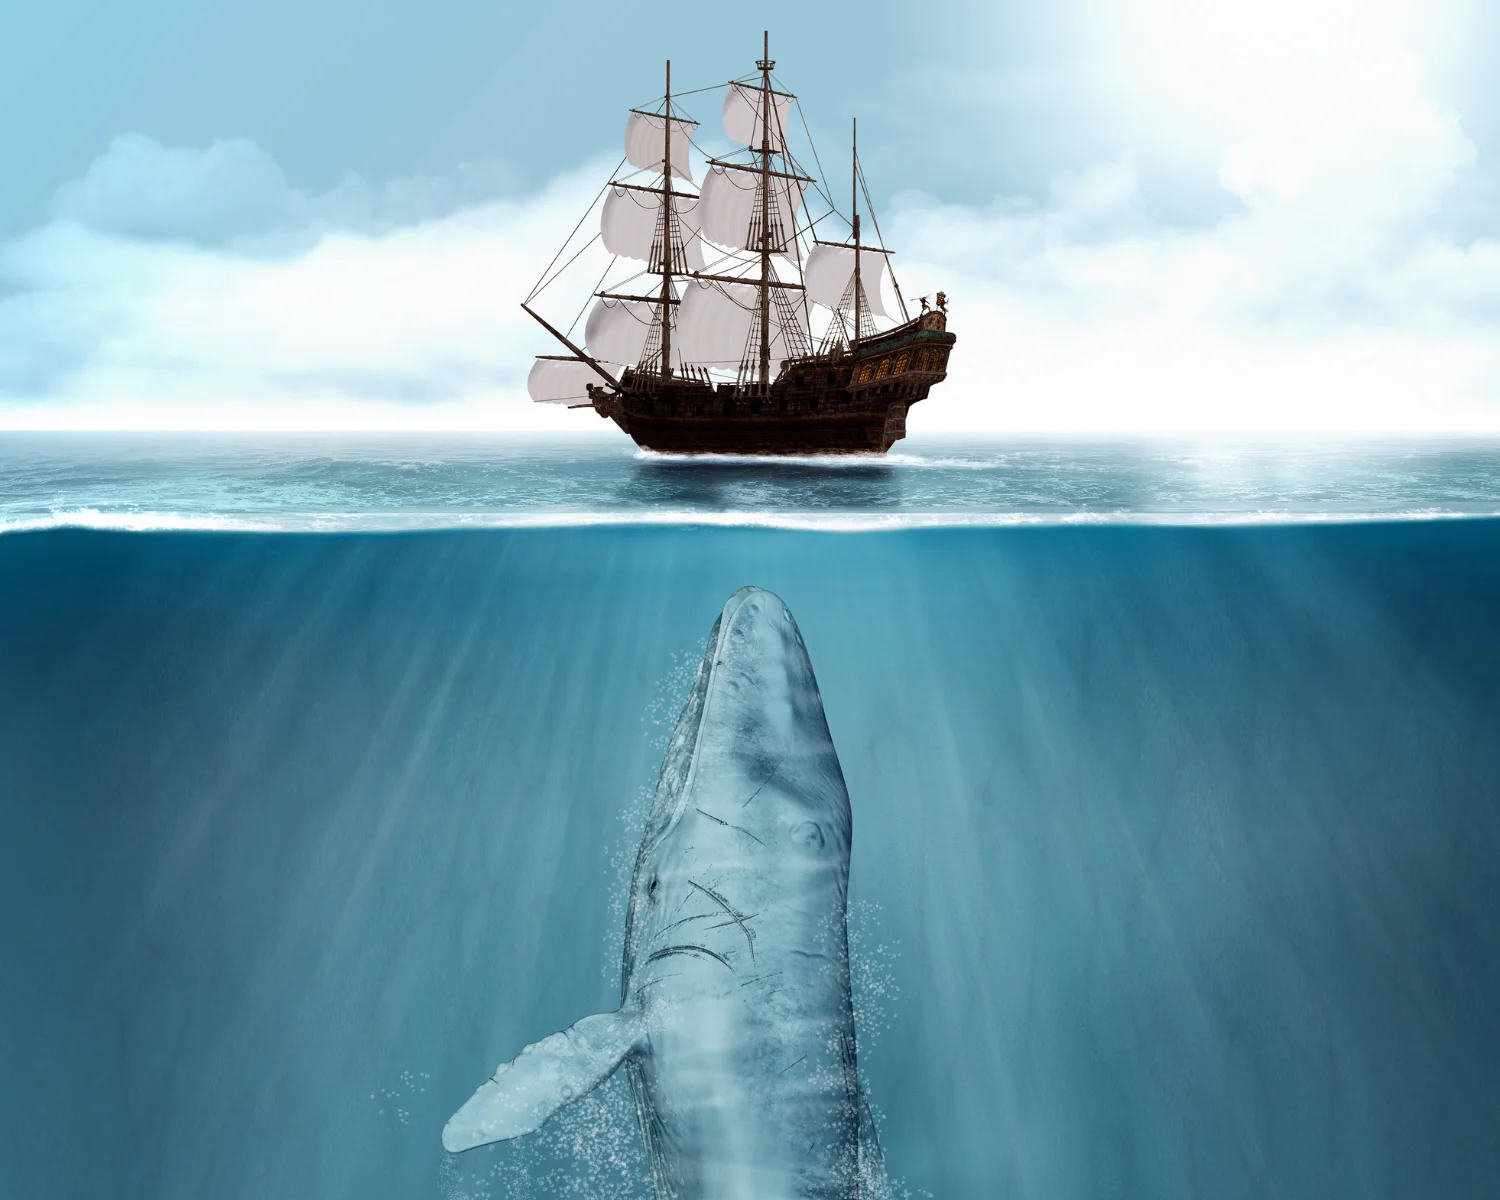 Ship in water with a whale below the water